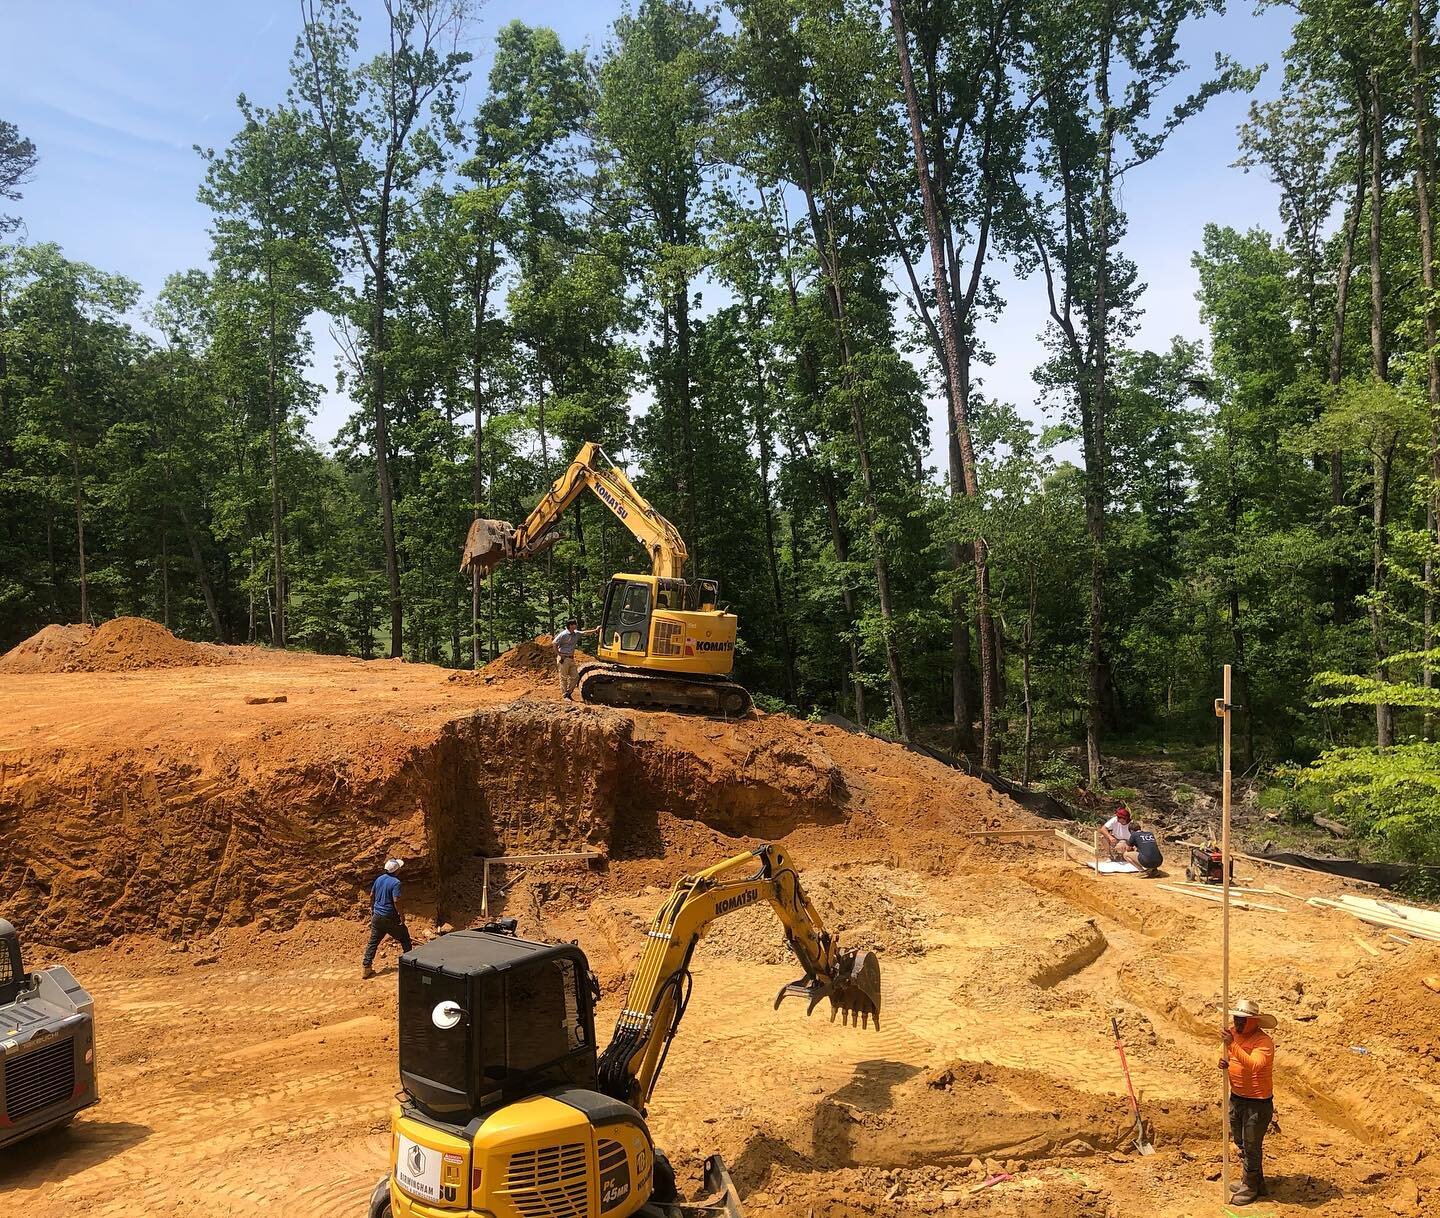 Construction has started on a new project at Shoal Creek 🦺🏗🔨 Excited to team up with @carlislemoorearchitects and @tcc_contractors again. 

#newhomeconstruction #construction #interiordesign #architecture #interiordesign #golfcourse #lynnallendesi